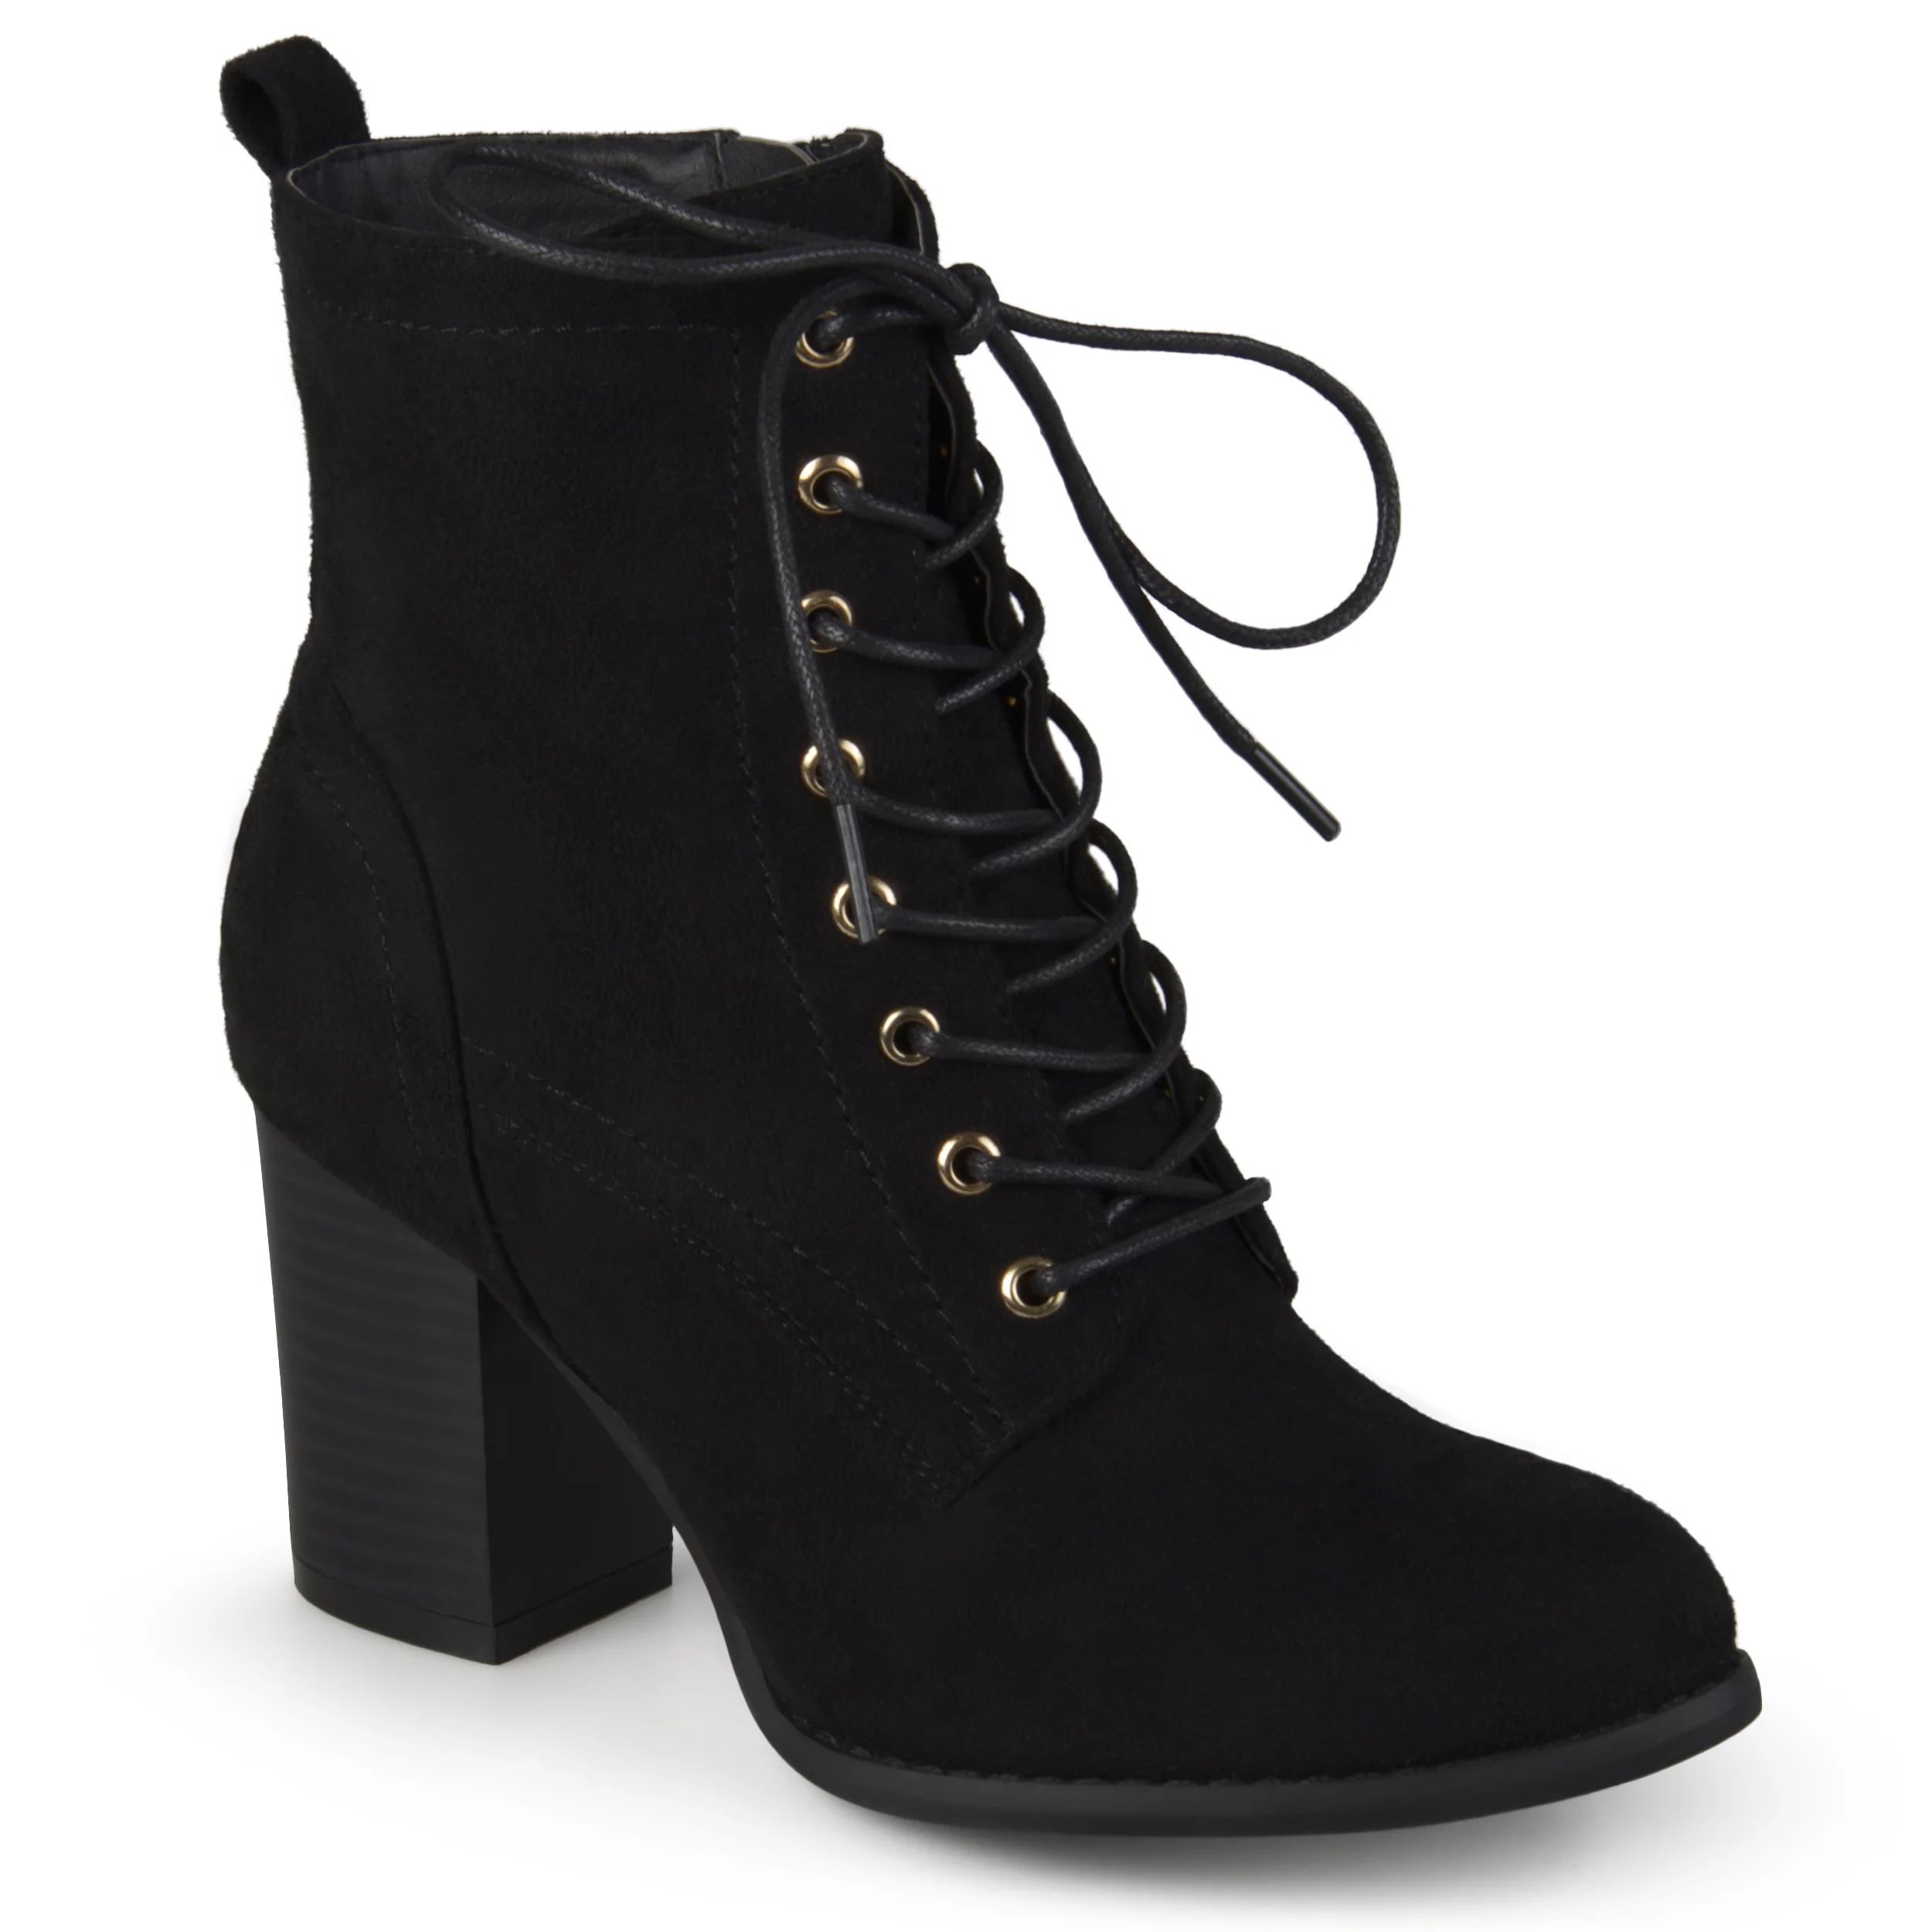 Brinley Co. Women's Lace-Up Faux Suede Booties with Stacked Heel | Walmart (US)